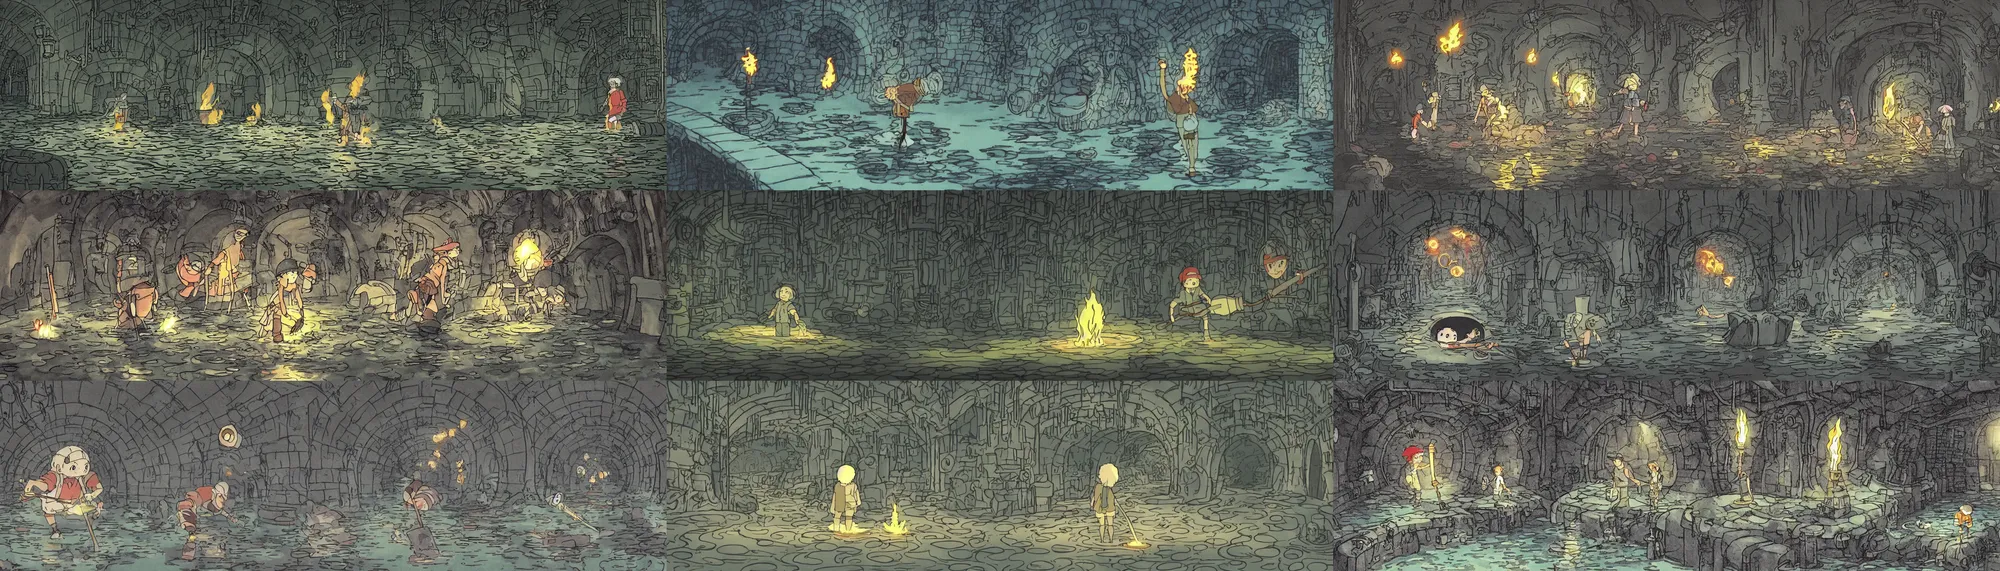 Prompt: scene from studio ghibli's sewer adventures where the wizard stands in a waist - deep river holding a torch in a long twisting sewer tunnel. underground, crumbling masonry, sewage falling from grates.